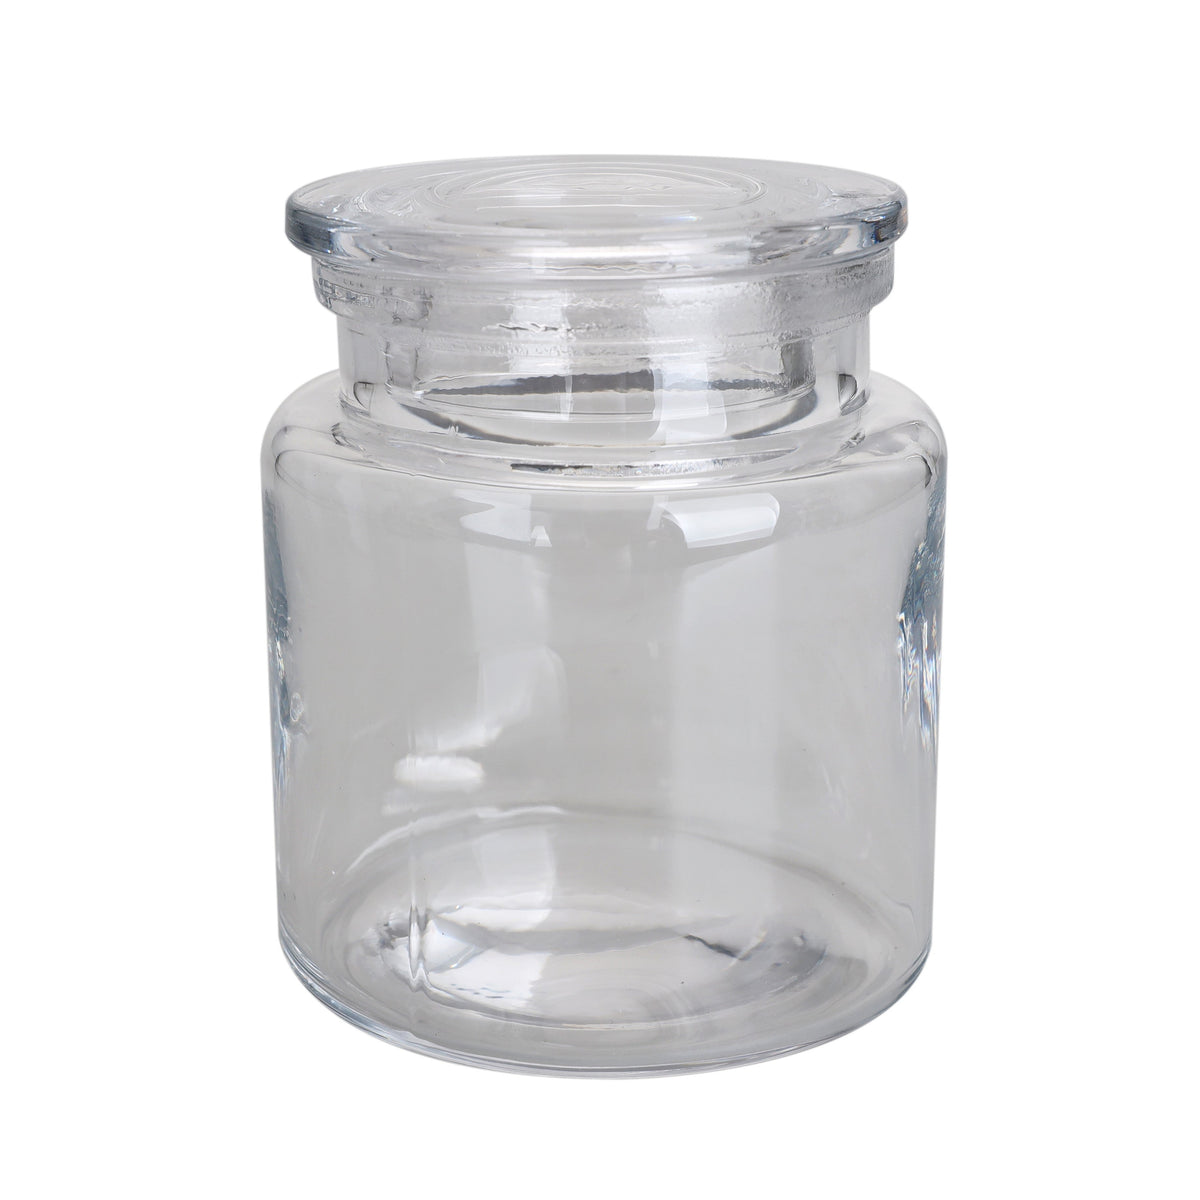 Dwell Clear Glass Canister - White